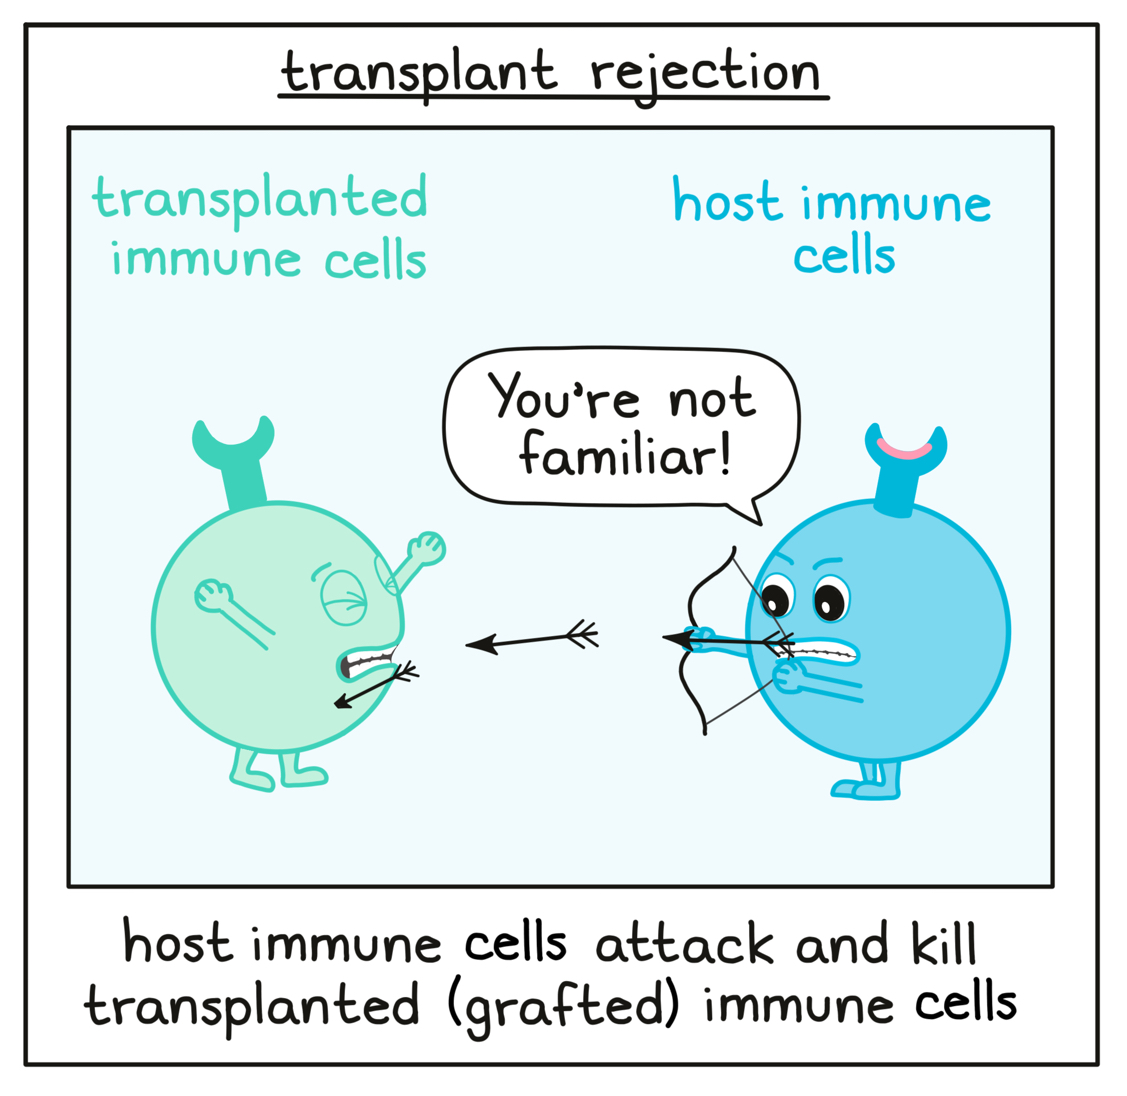 Illustration showing host immune cells attacking and killing grafted immune cells